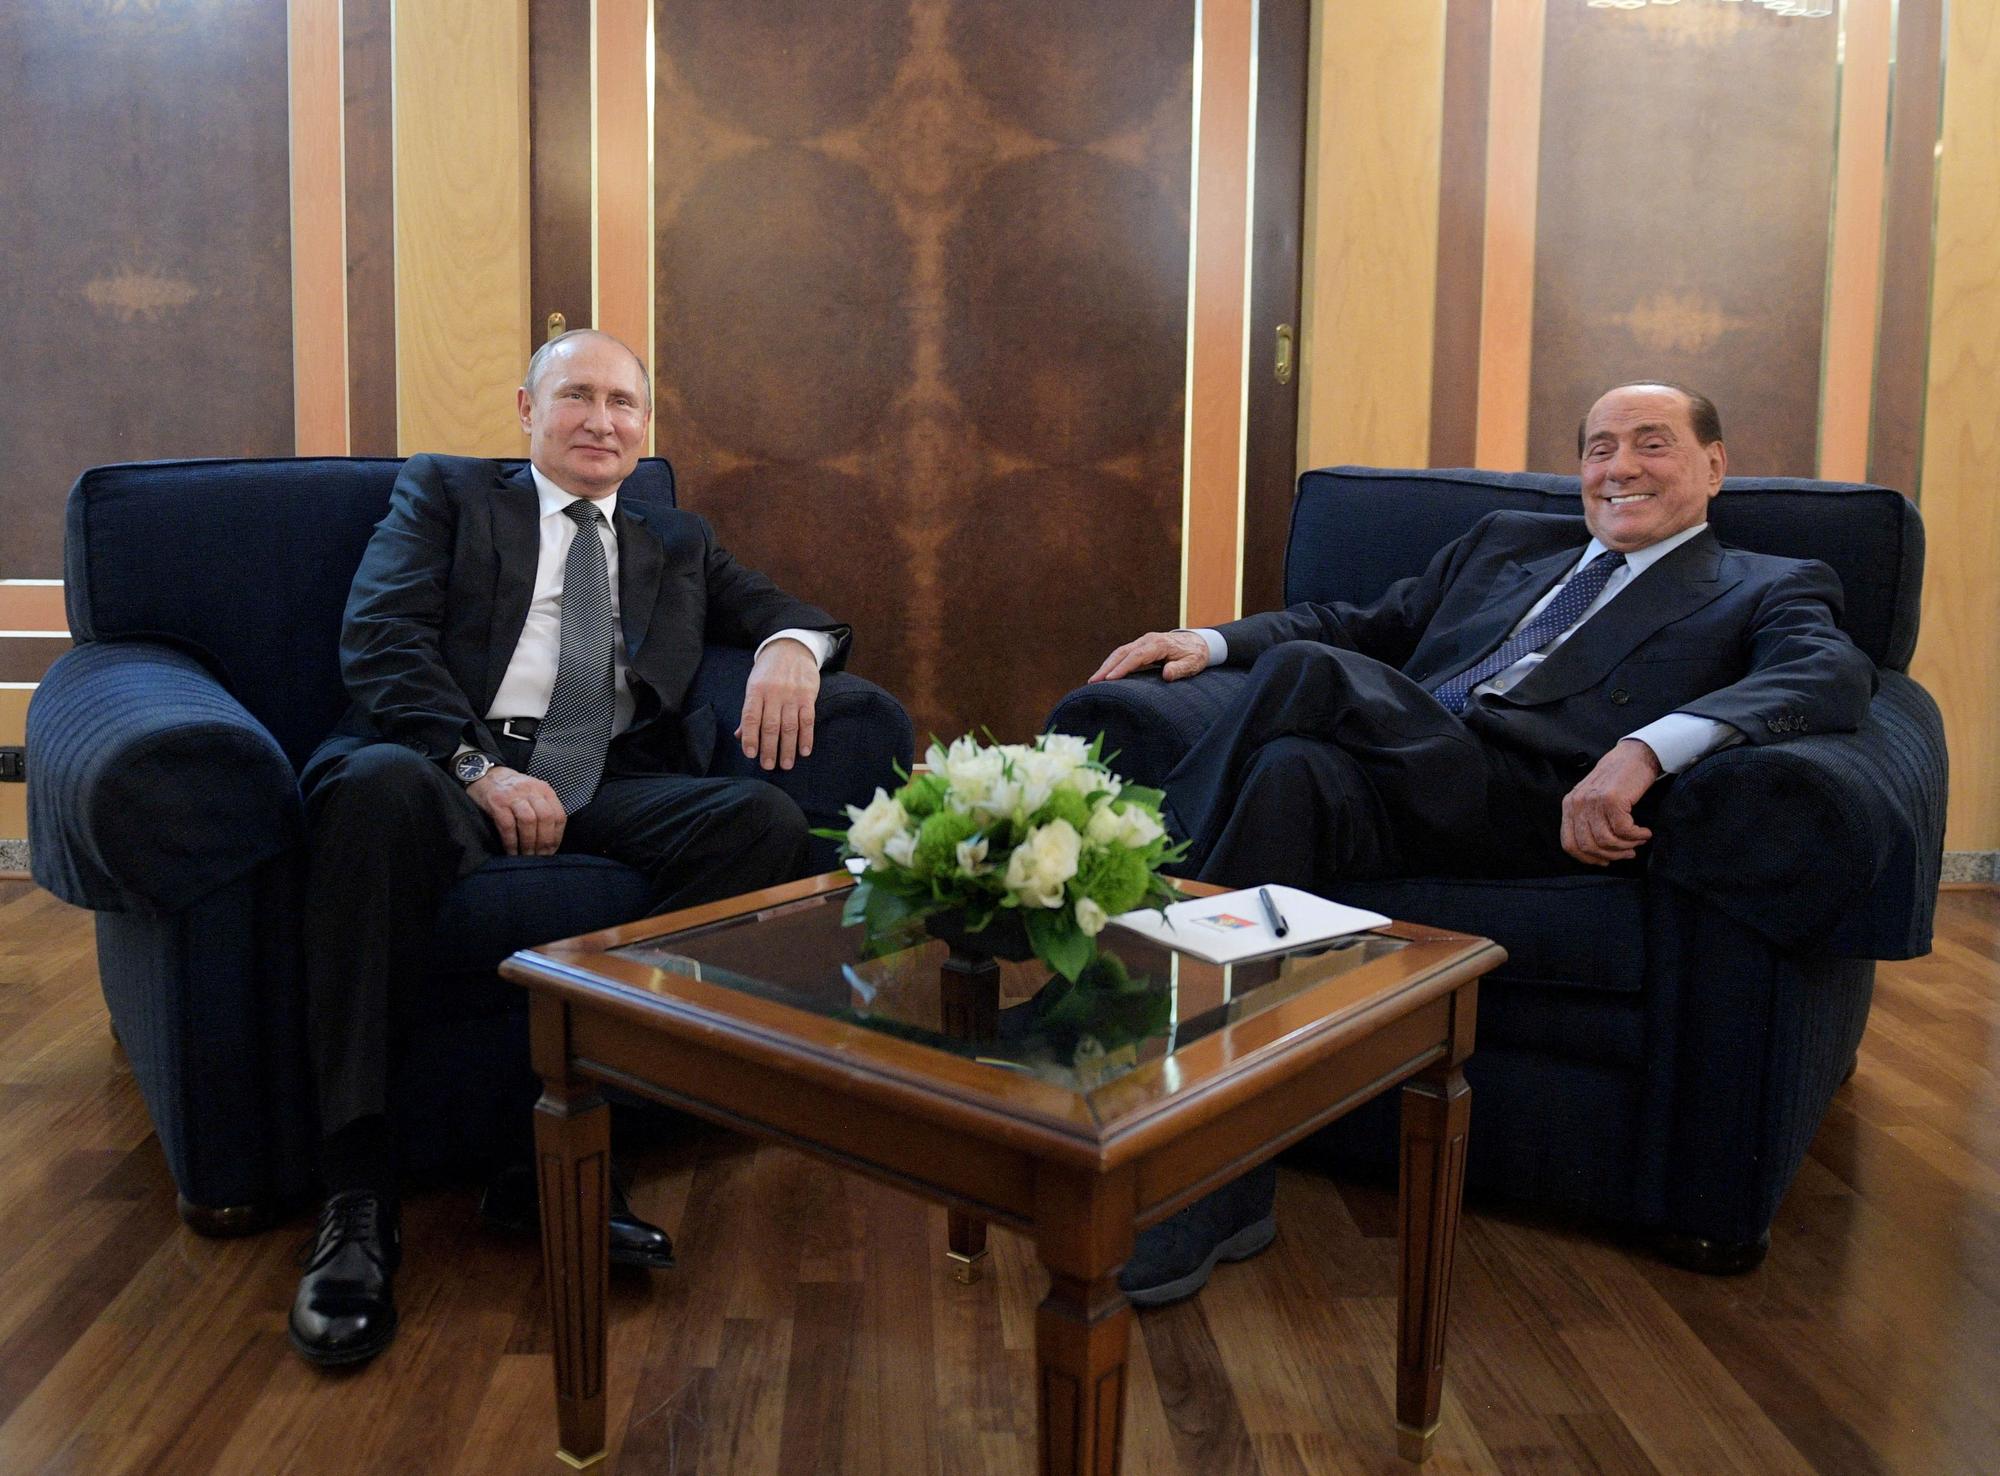 Russian President Vladimir Putin meets with Silvio Berlusconi at an airport in Rome, Italy July 4, 2019.